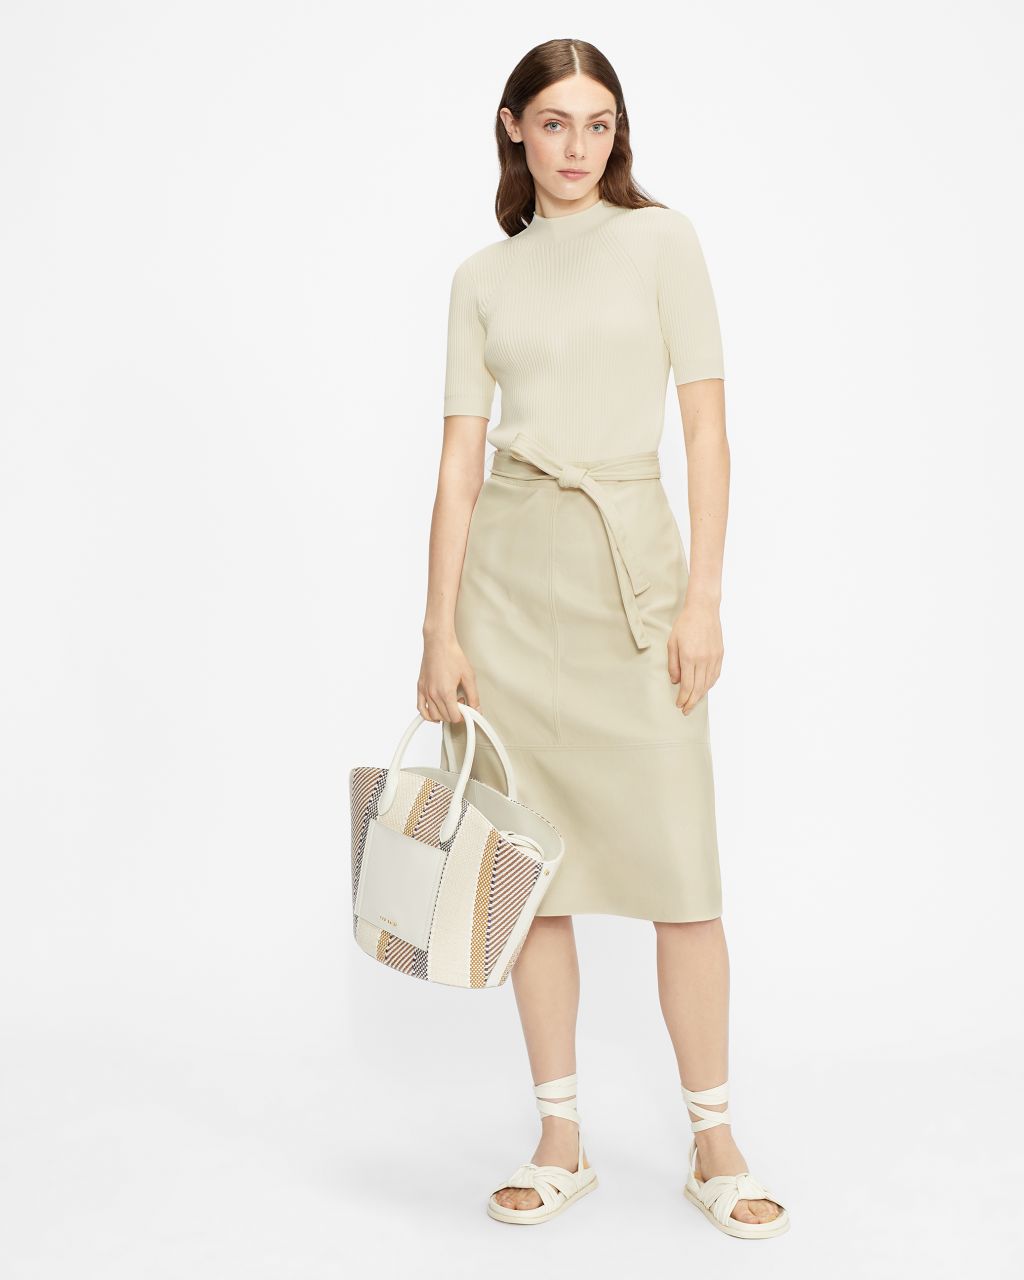 Ted Baker Women's Pleather Mockable Midi Dress in Natural, Susanna